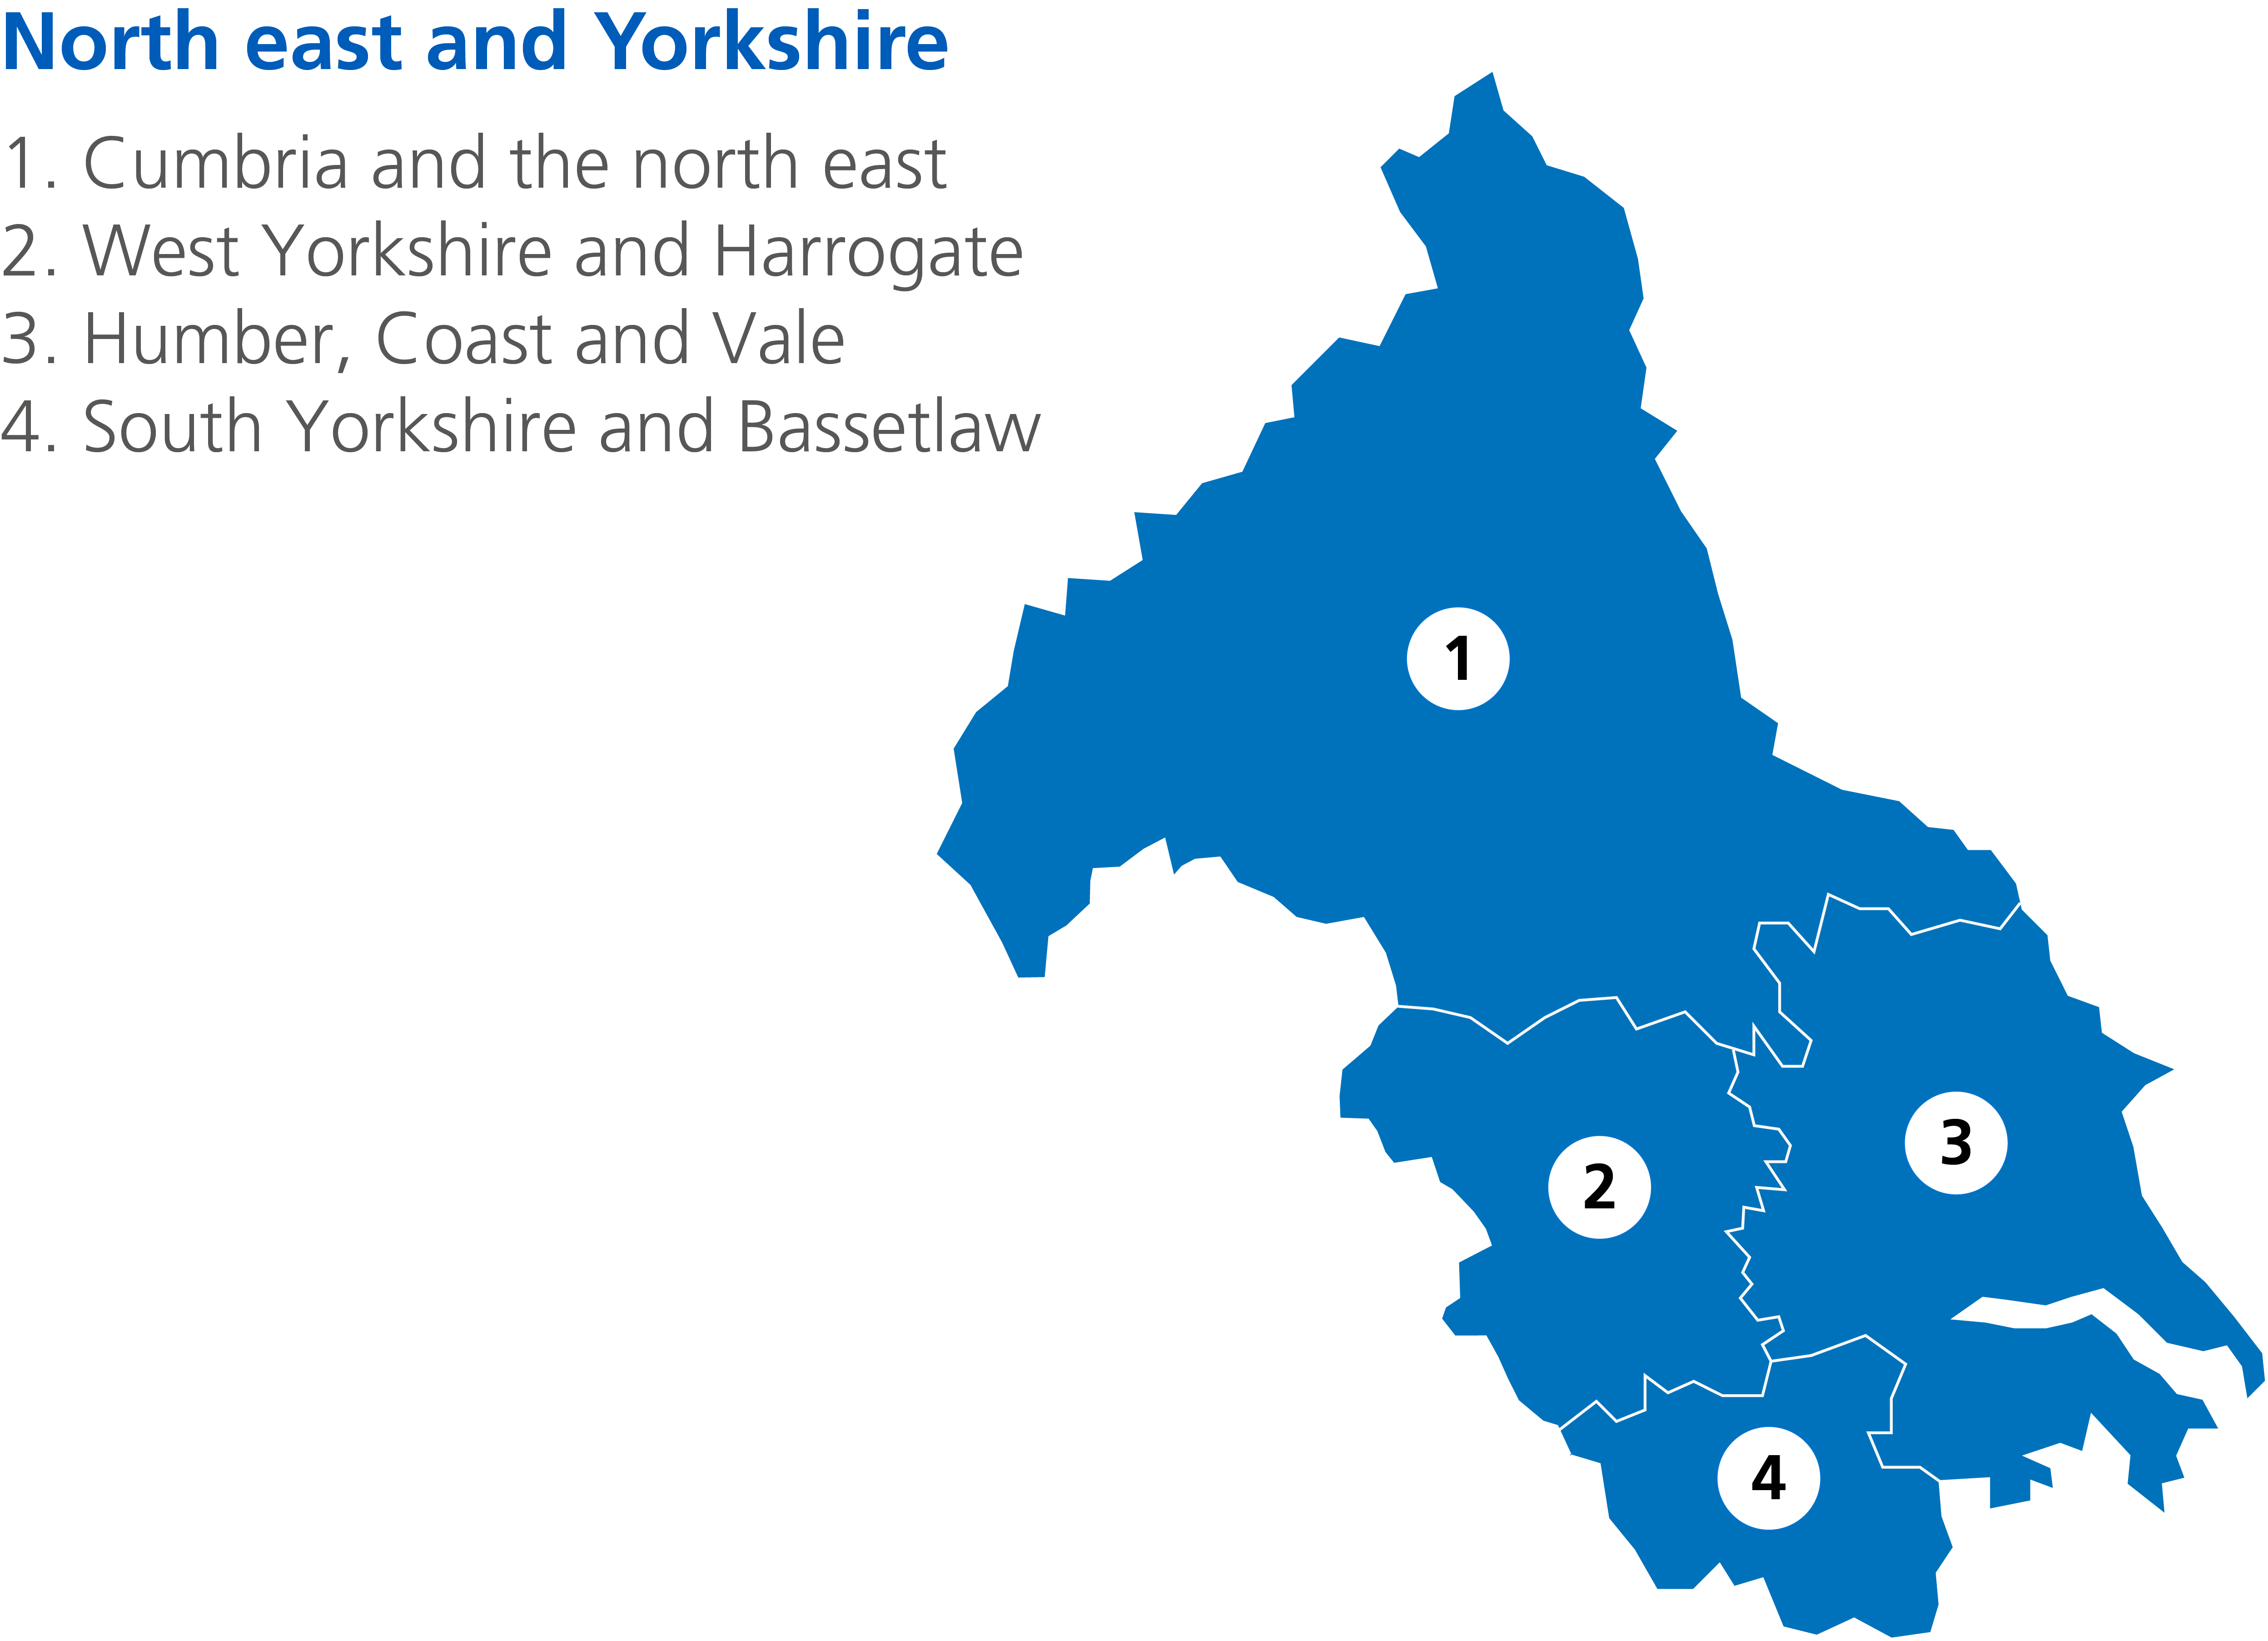 About us North East and Yorkshire map. 
1. Cumbria and the North East
2. West Yorkshire and Harrogate
3. Humber, Cost and Vale
4. South Yorkshire and Bassetlaw